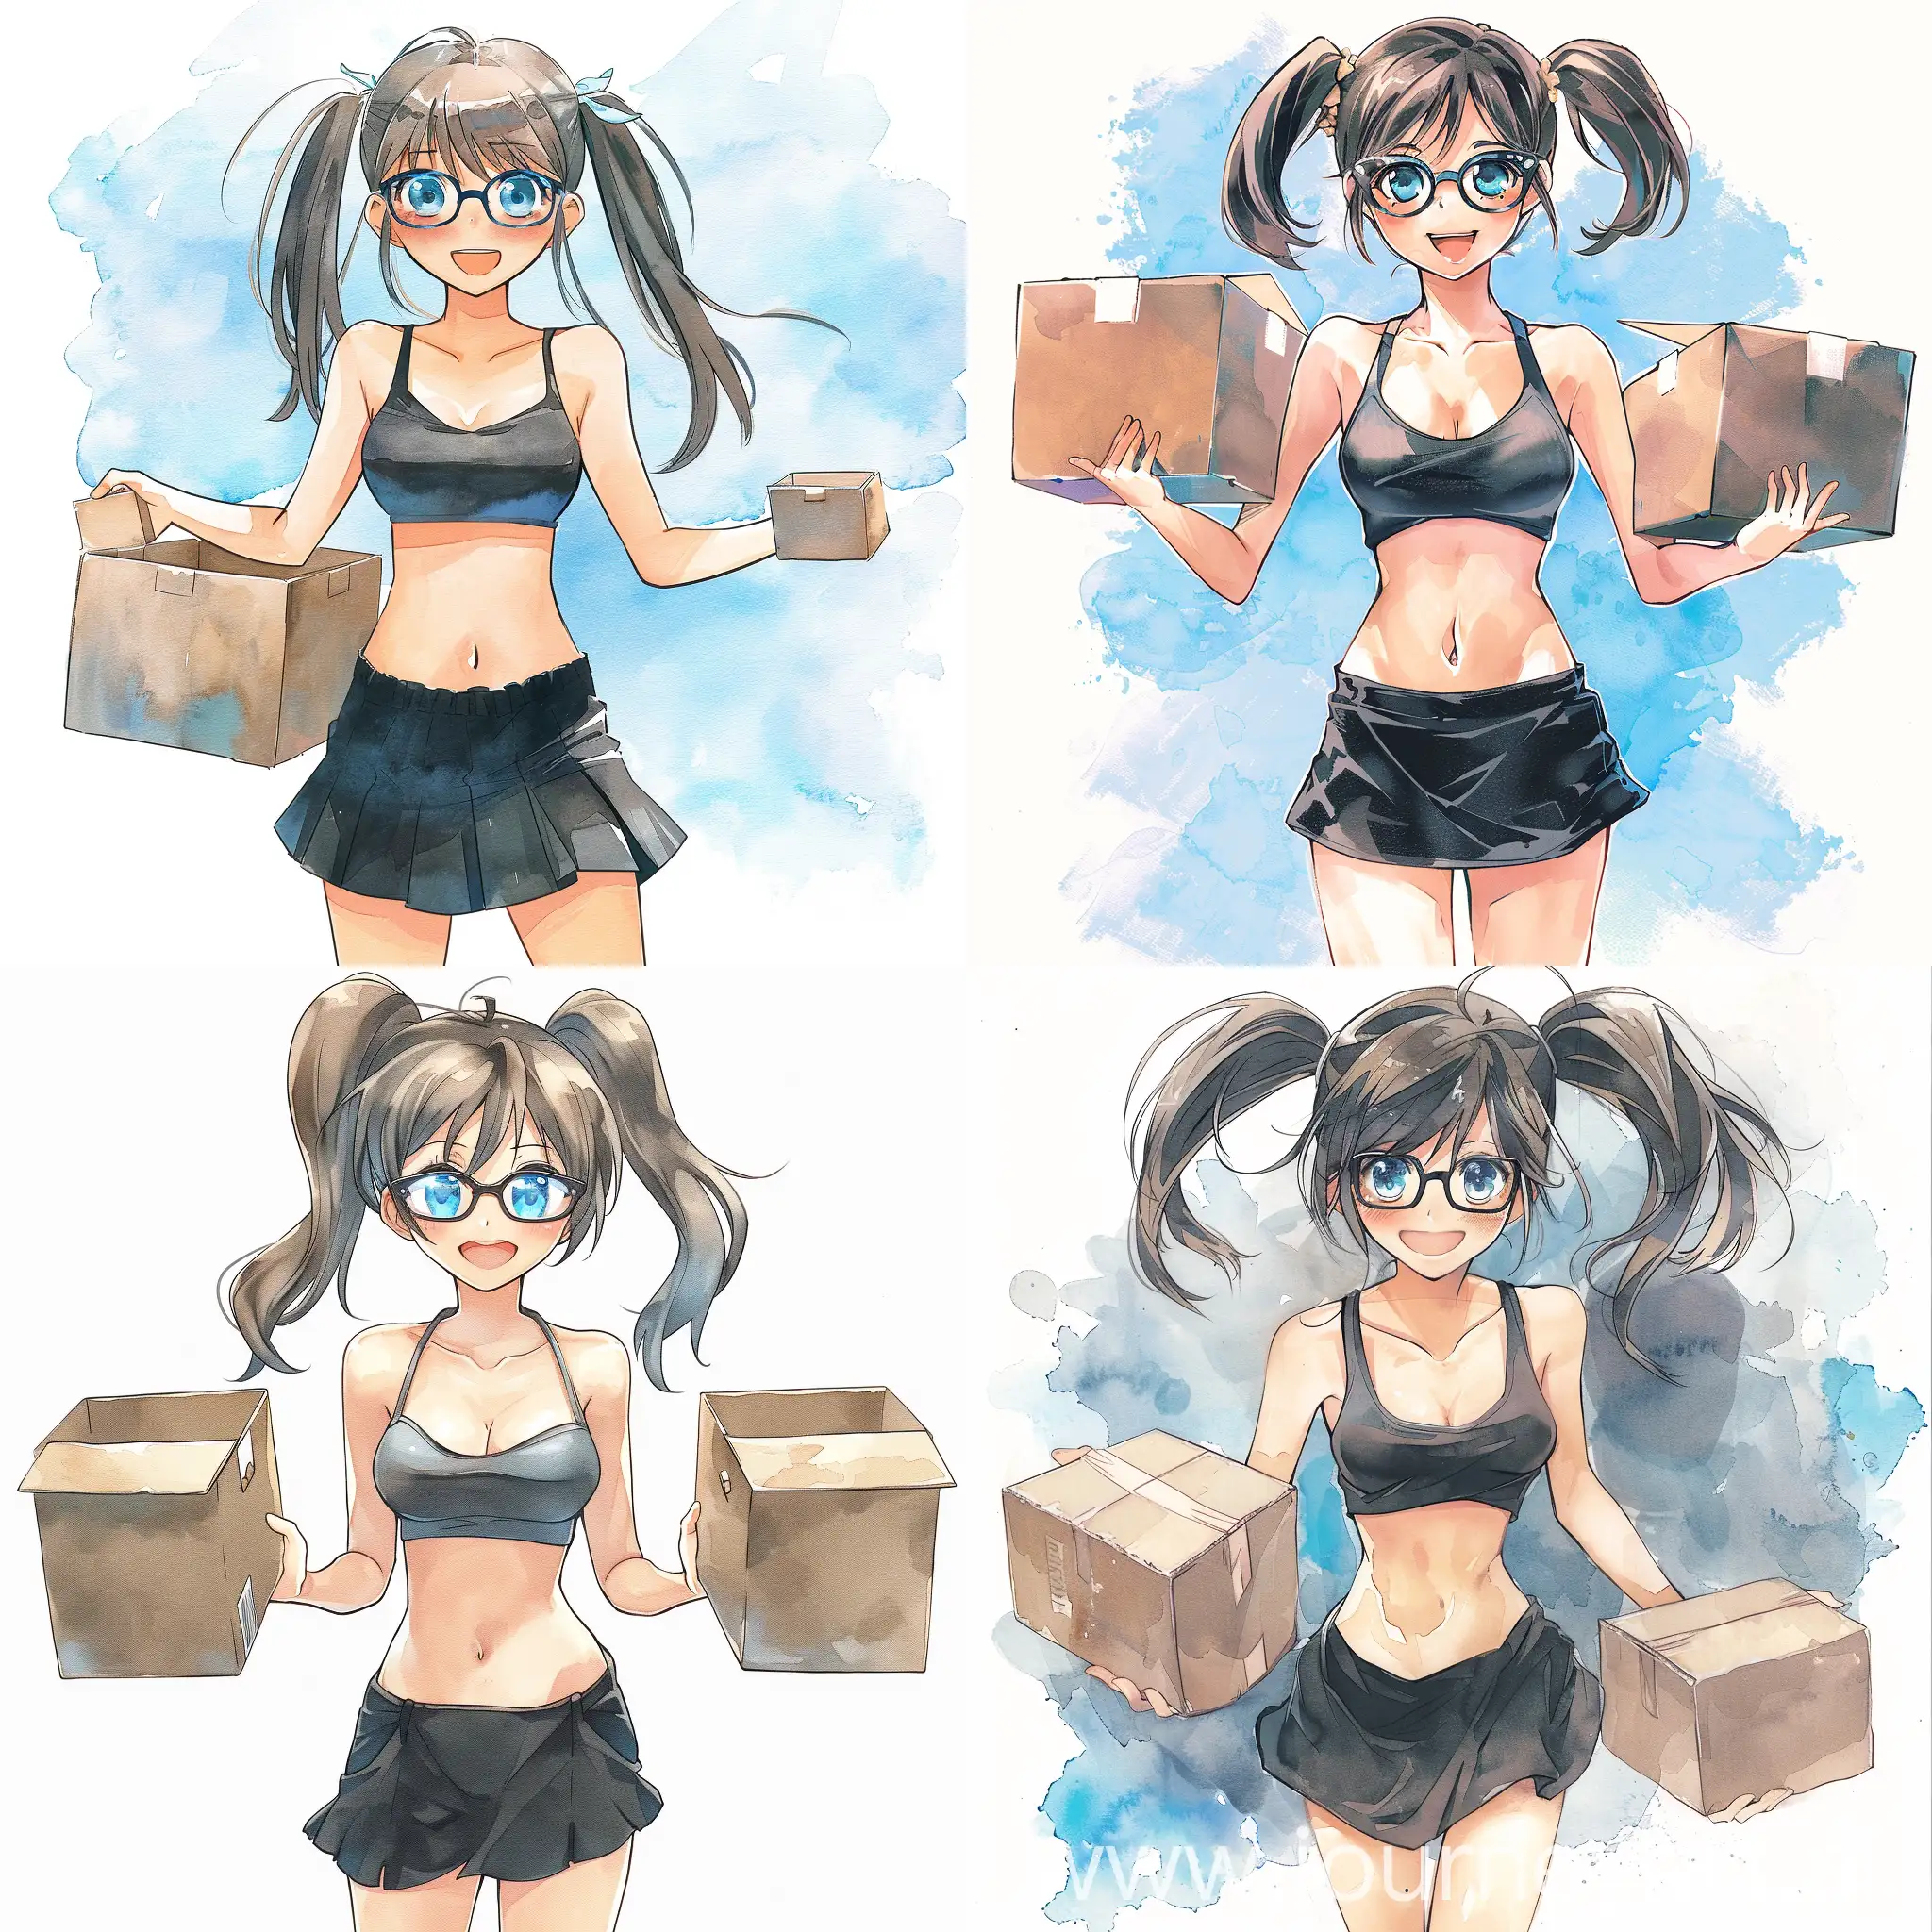 hd quality,good quality,high res,anime style image,anime girl,holding cardboard box with 2 hands,skirt black color,tank top black color,ponytail,glasses blue eyes,sexy figure,smile,top down view,watercolor,anime eyes,good mouth,watercolor